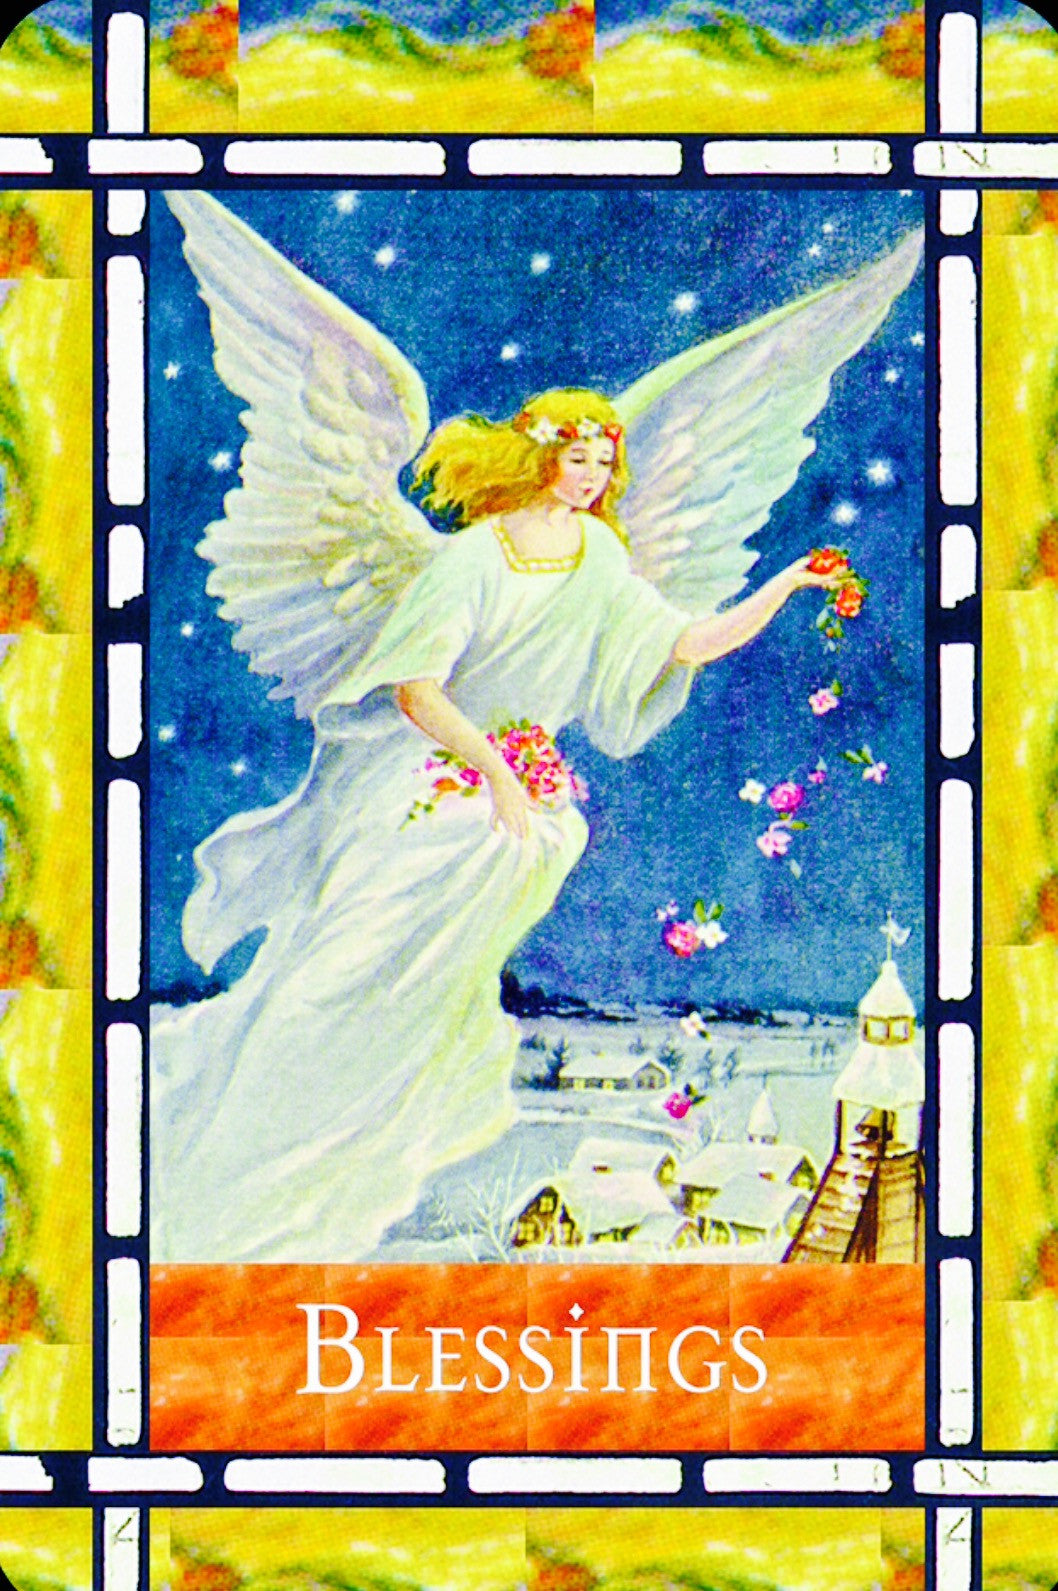 Blessings: “God and the angels are helping you right now. Continue to ask for their help, and then accept it when it comes (And it always does).